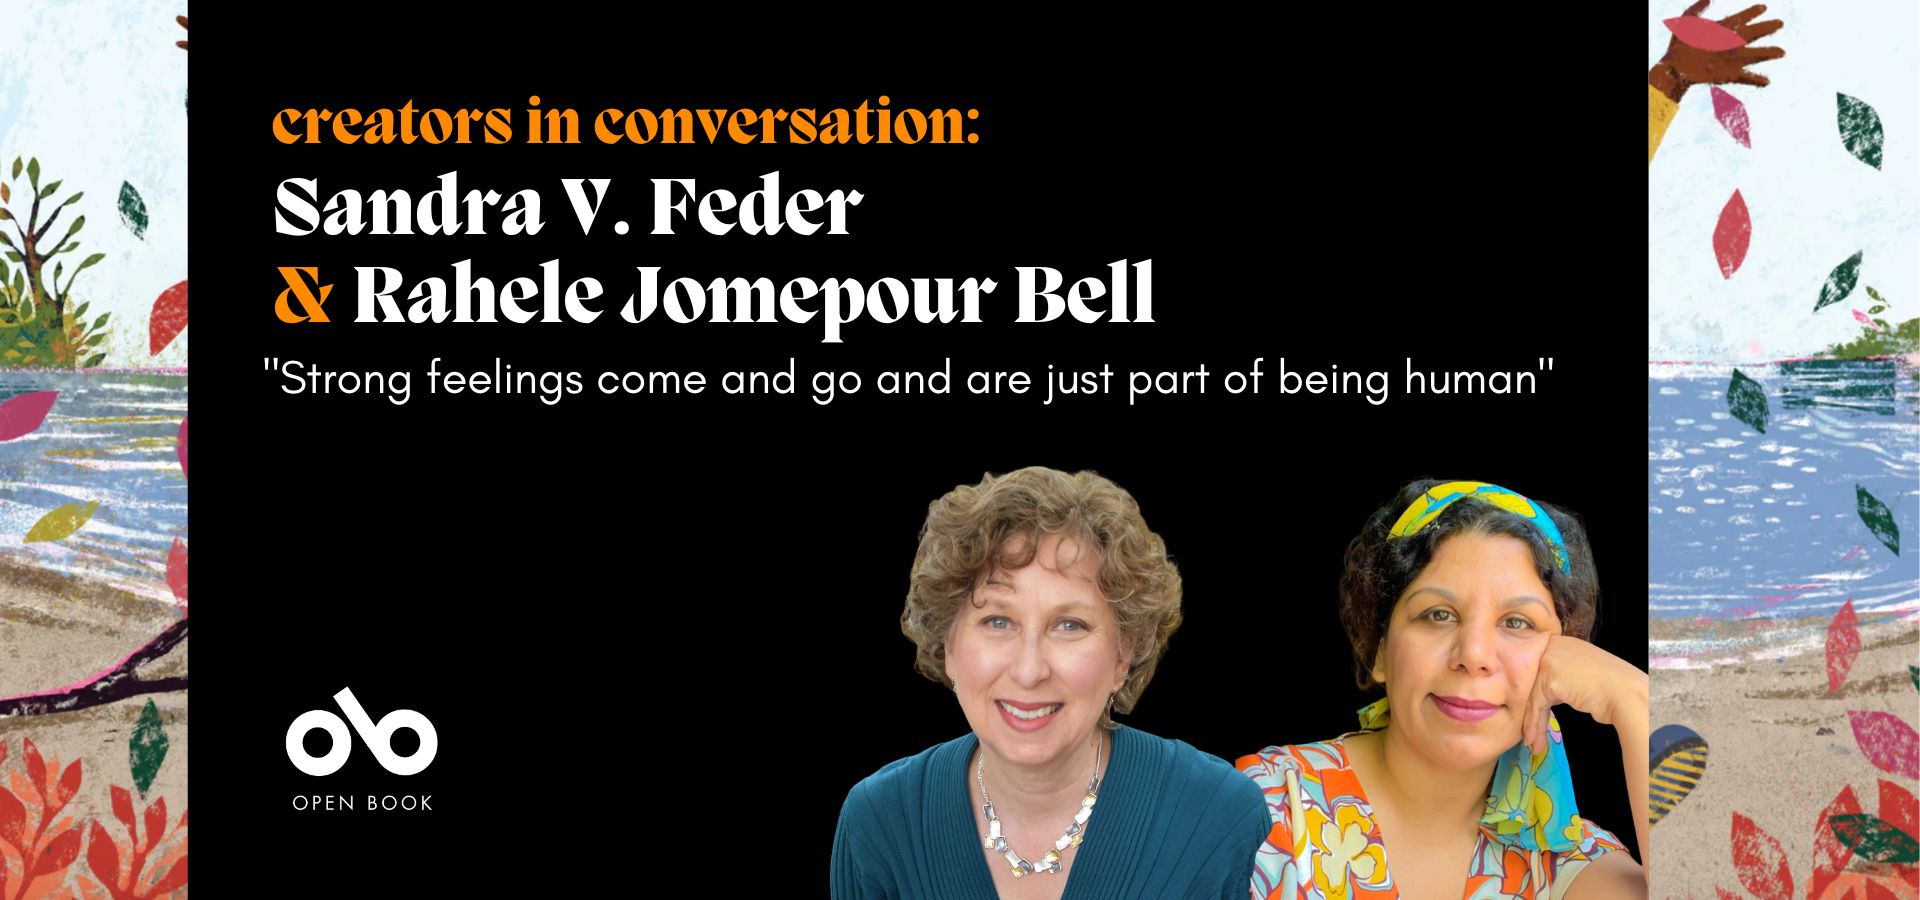 banner image with photos of artist Rahele Jomepour Bell and writer Sandra Feder. Black background with text reading "creators in conversation: Sandra V. Feder  & Rahele Jomepour Bell" and ""Strong feelings come and go and are just part of being human". Sidebar illustrations taken from Peaceful Me by Sandra V. Feder  & Rahele Jomepour Bell